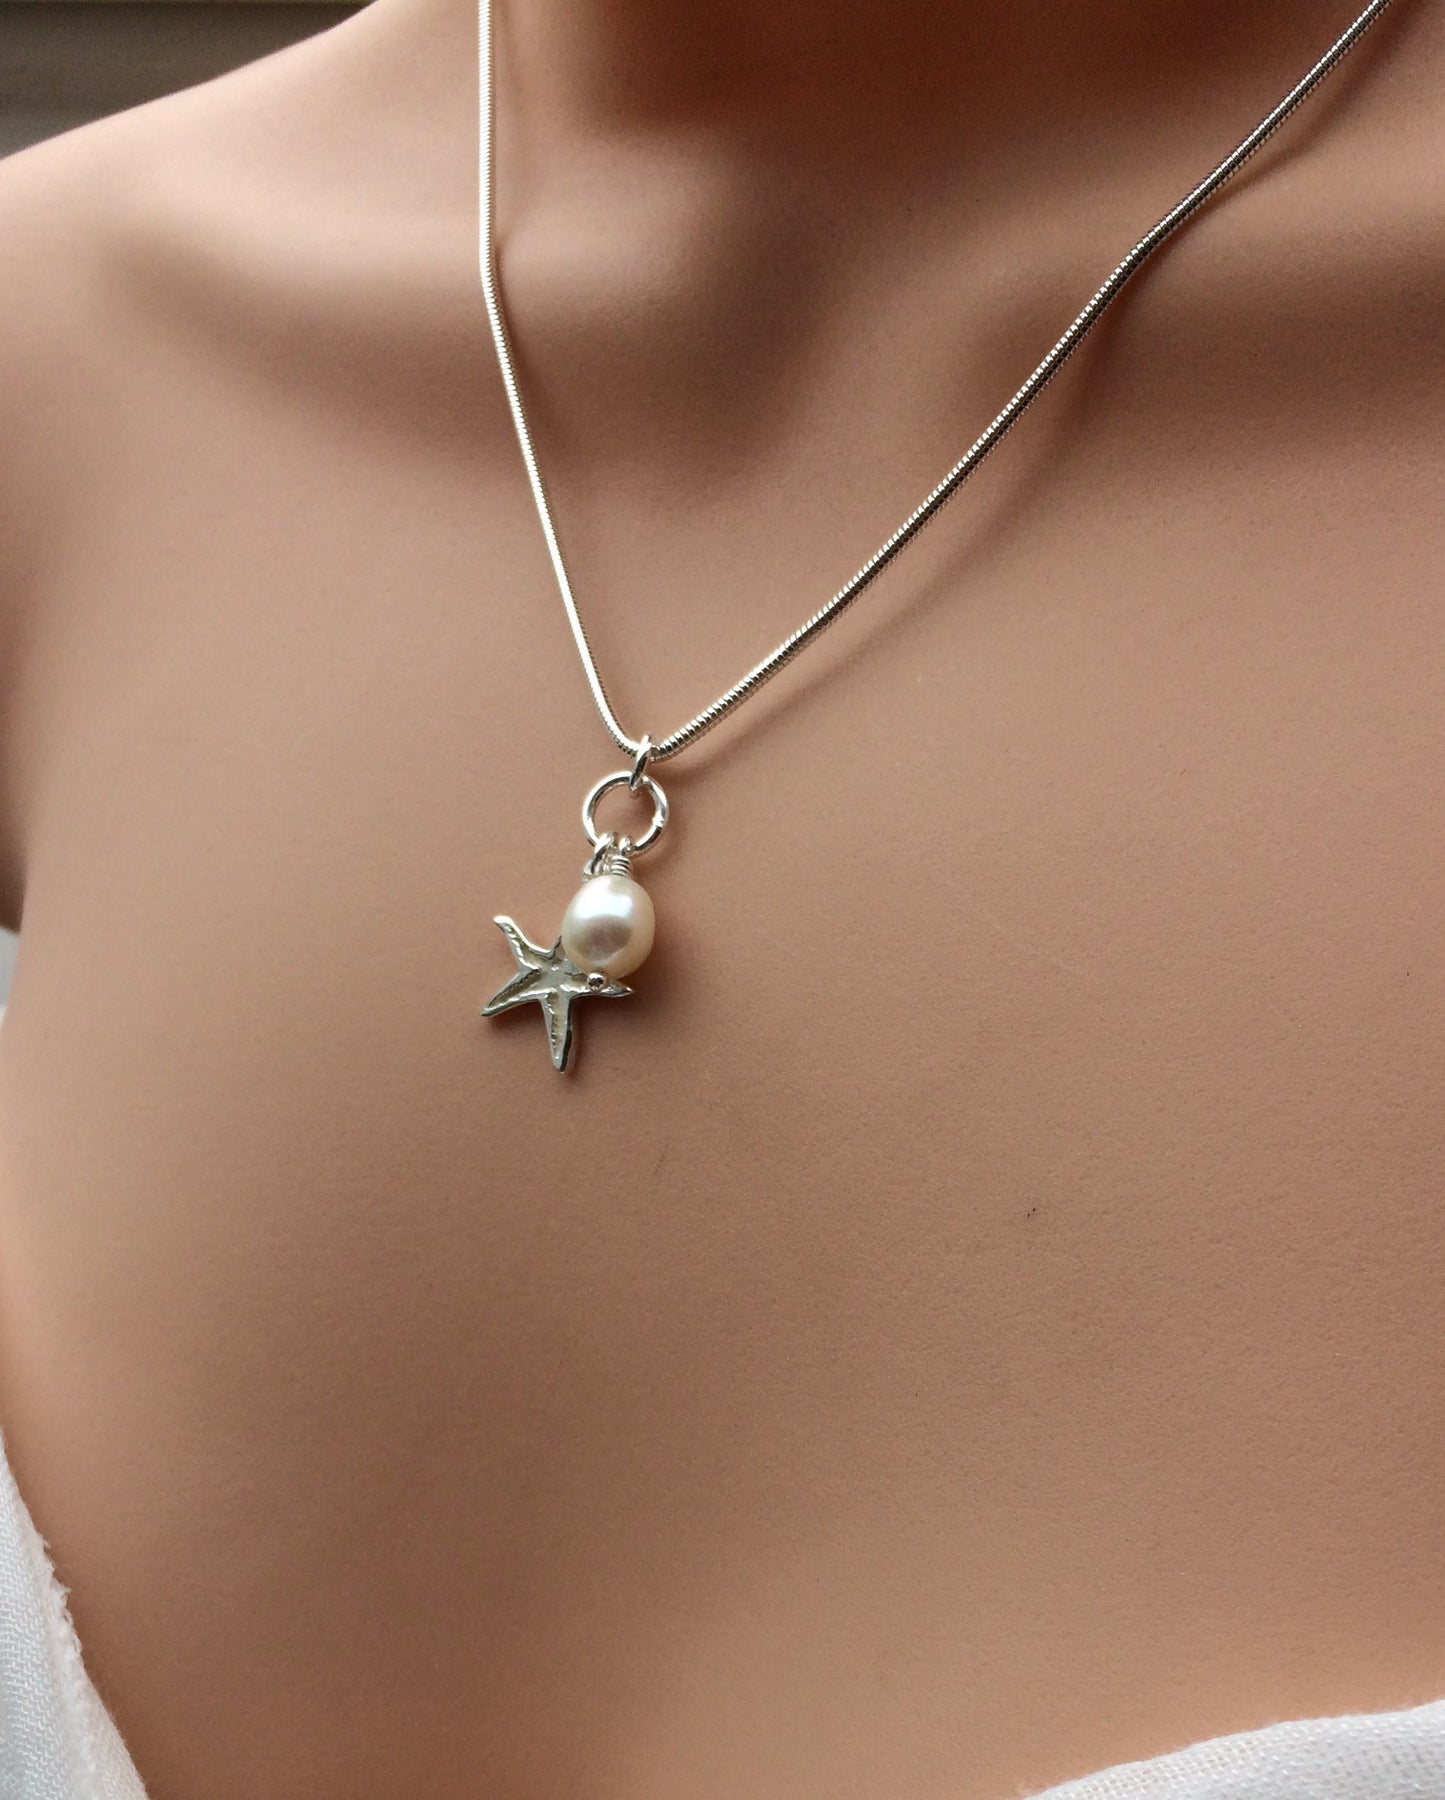 Starfish necklace with white pearl